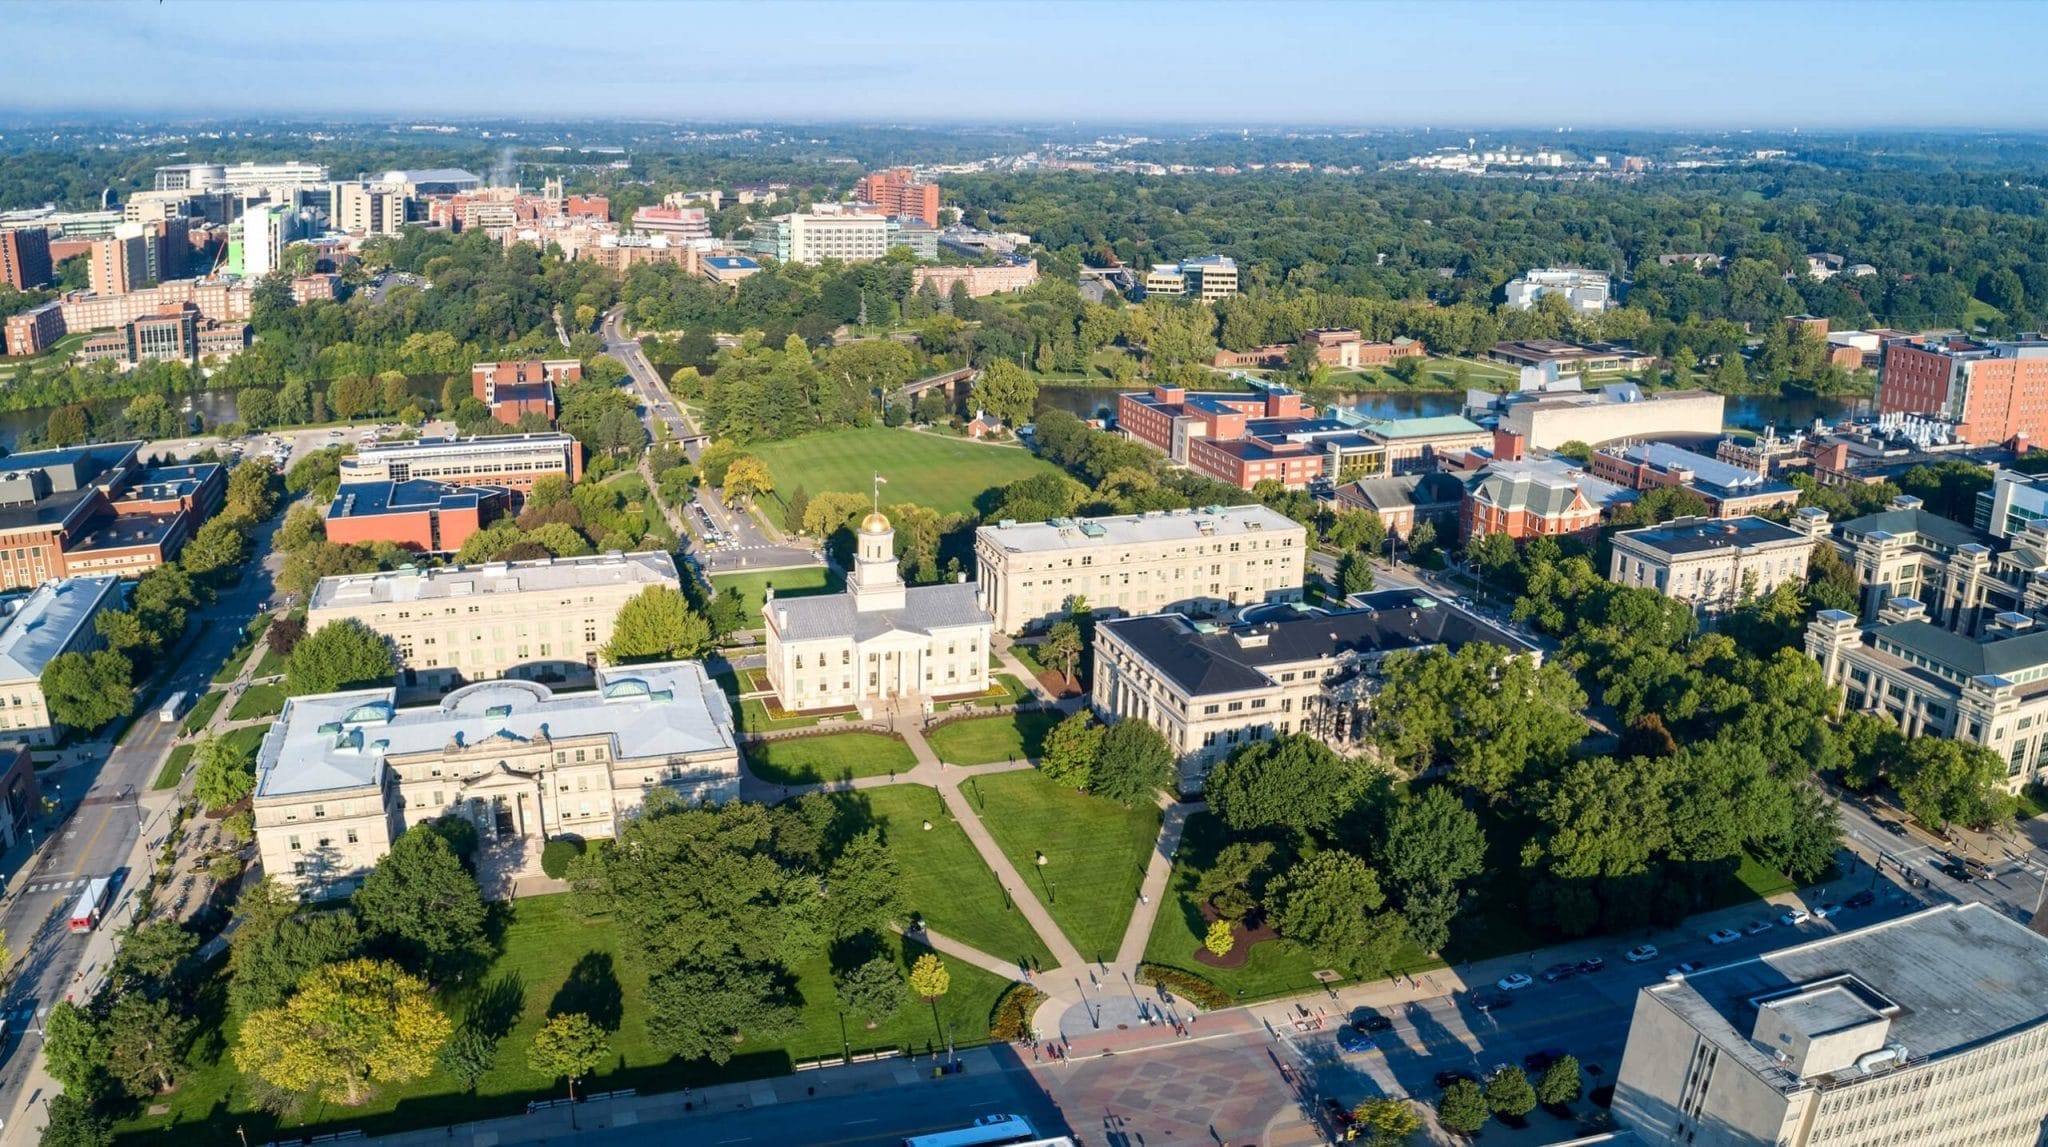 Aerial view of the University of Iowa, USA campus